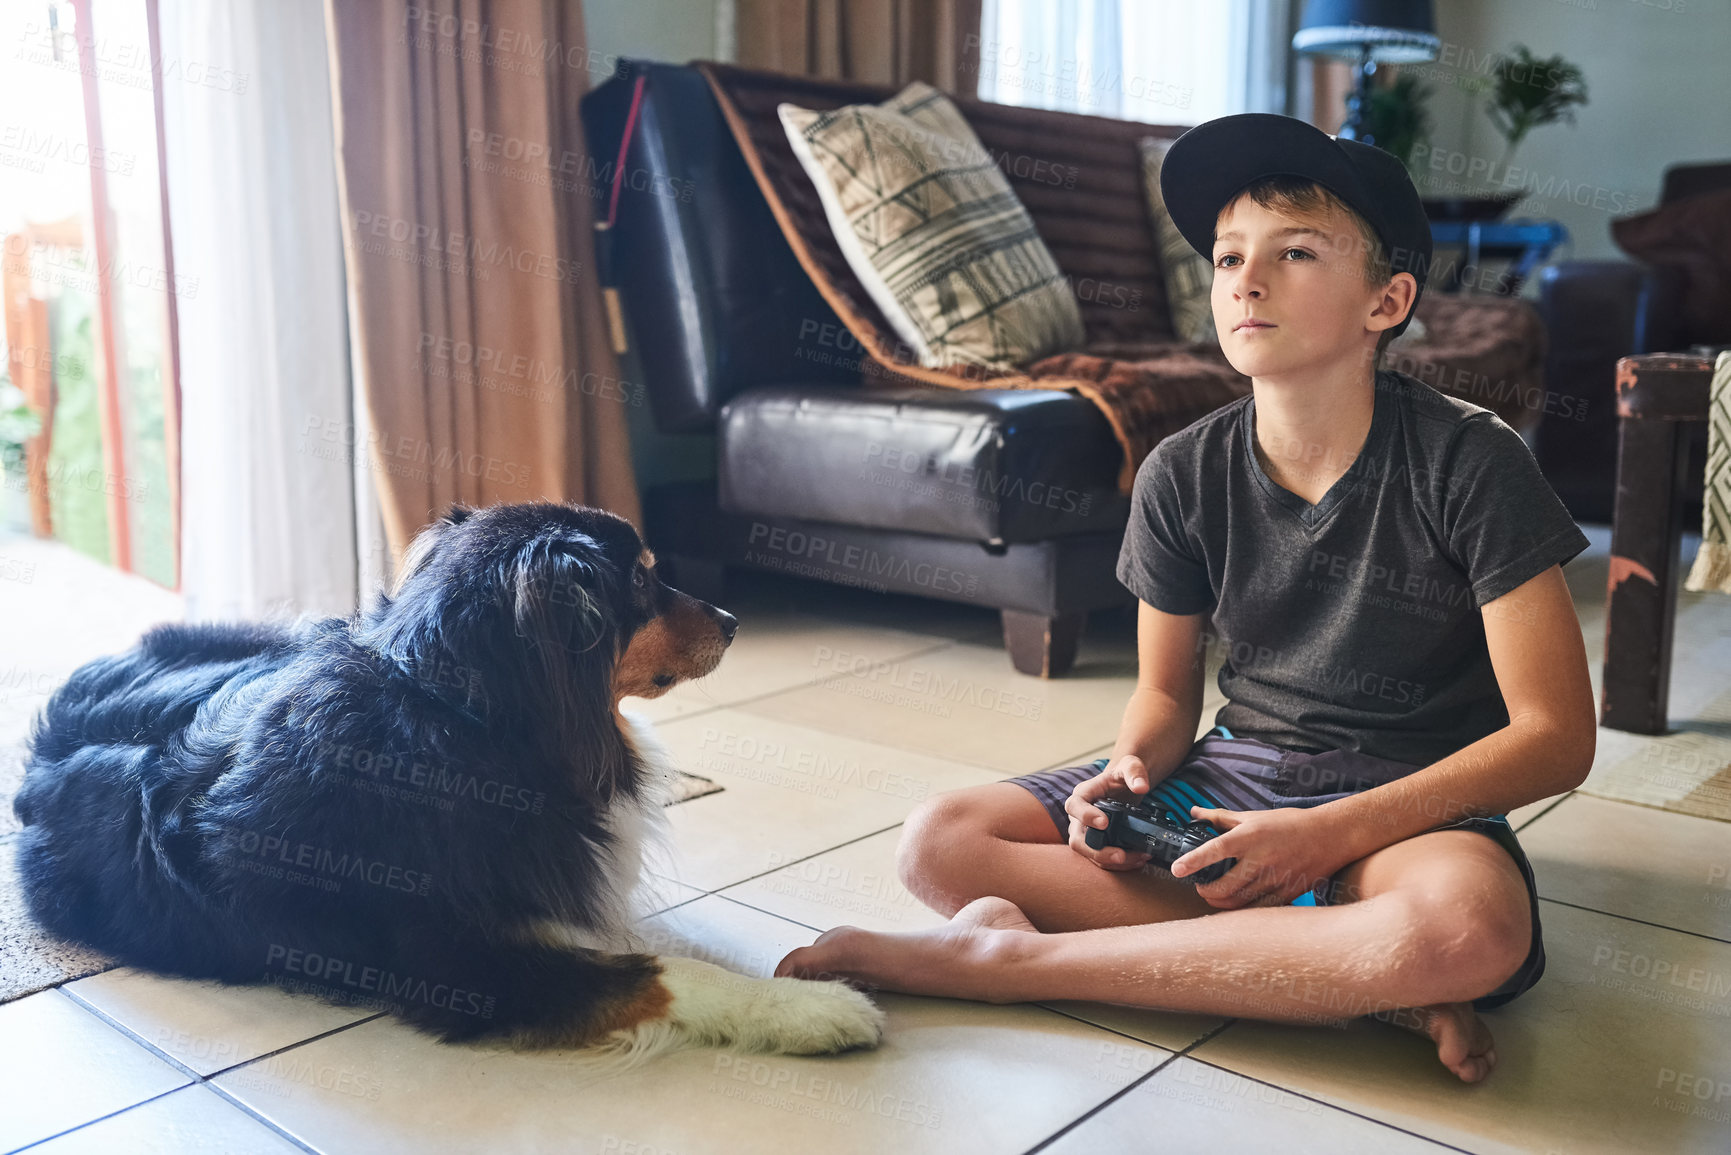 Buy stock photo Full length shot of a young boy playing video games at home